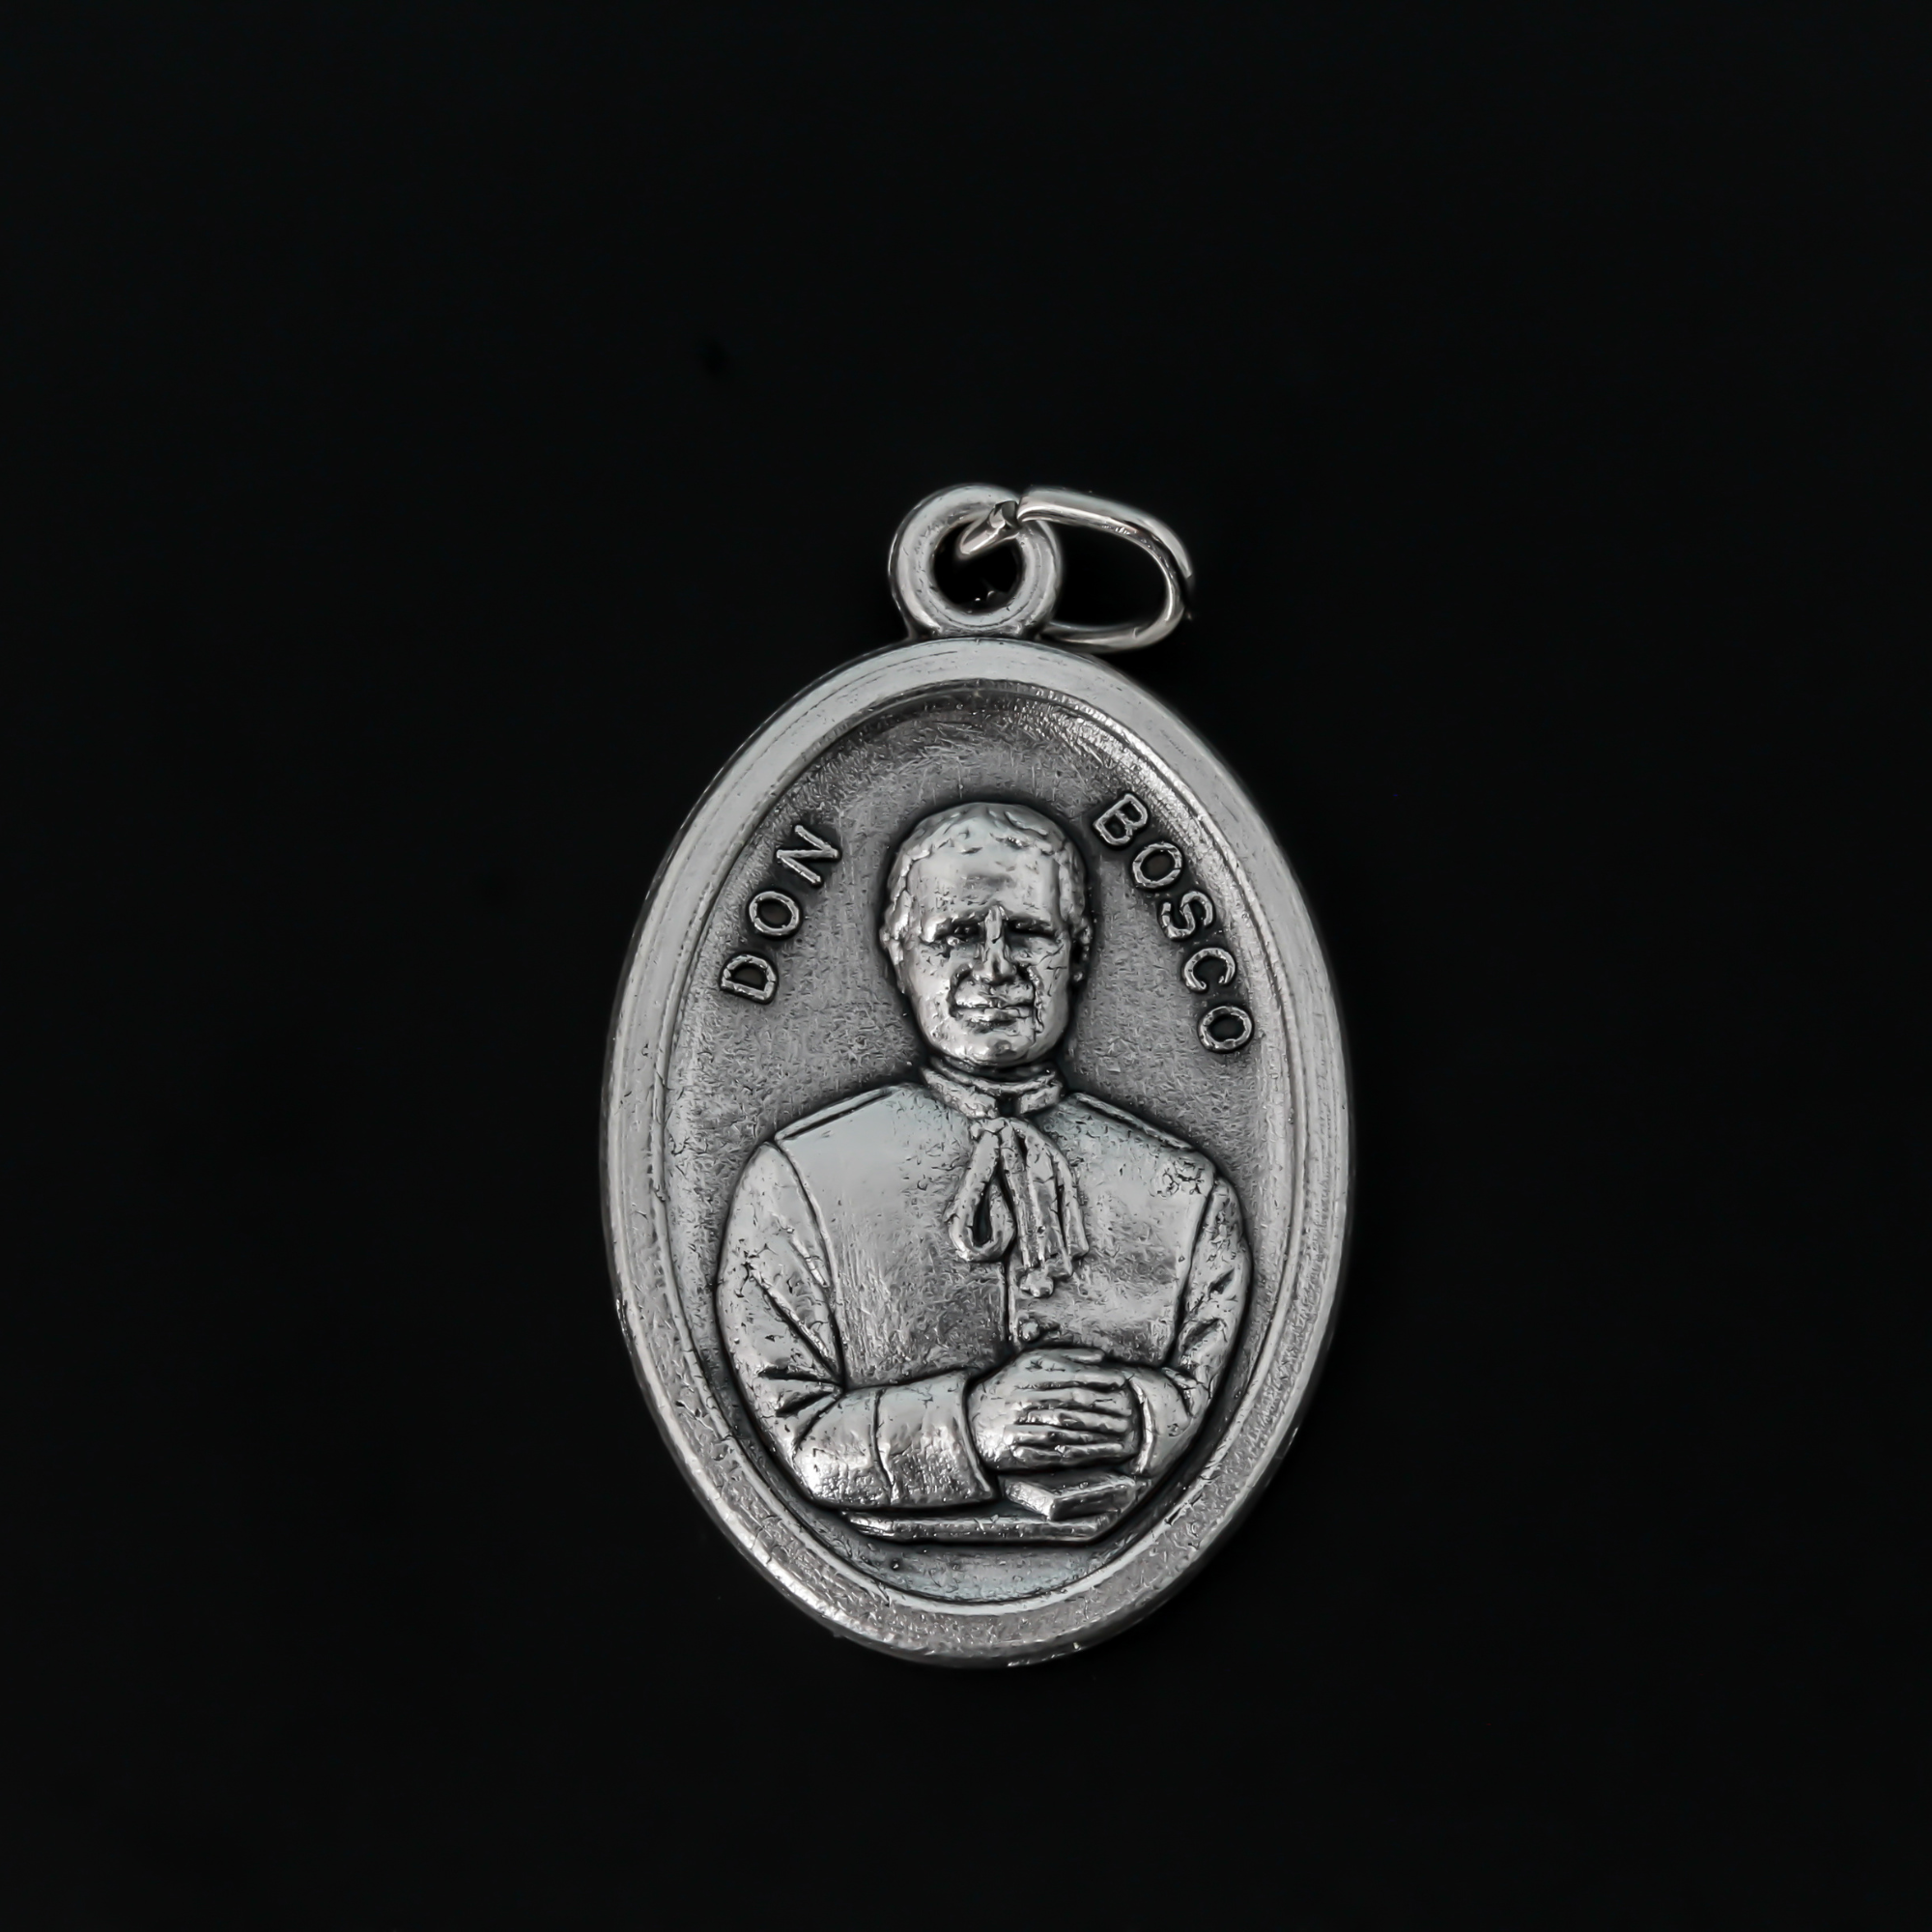 Saint Giovanni "Don" Bosco oval medal that depicts St. Don Bosco on the front and Mary, Help of Christians, on the bac